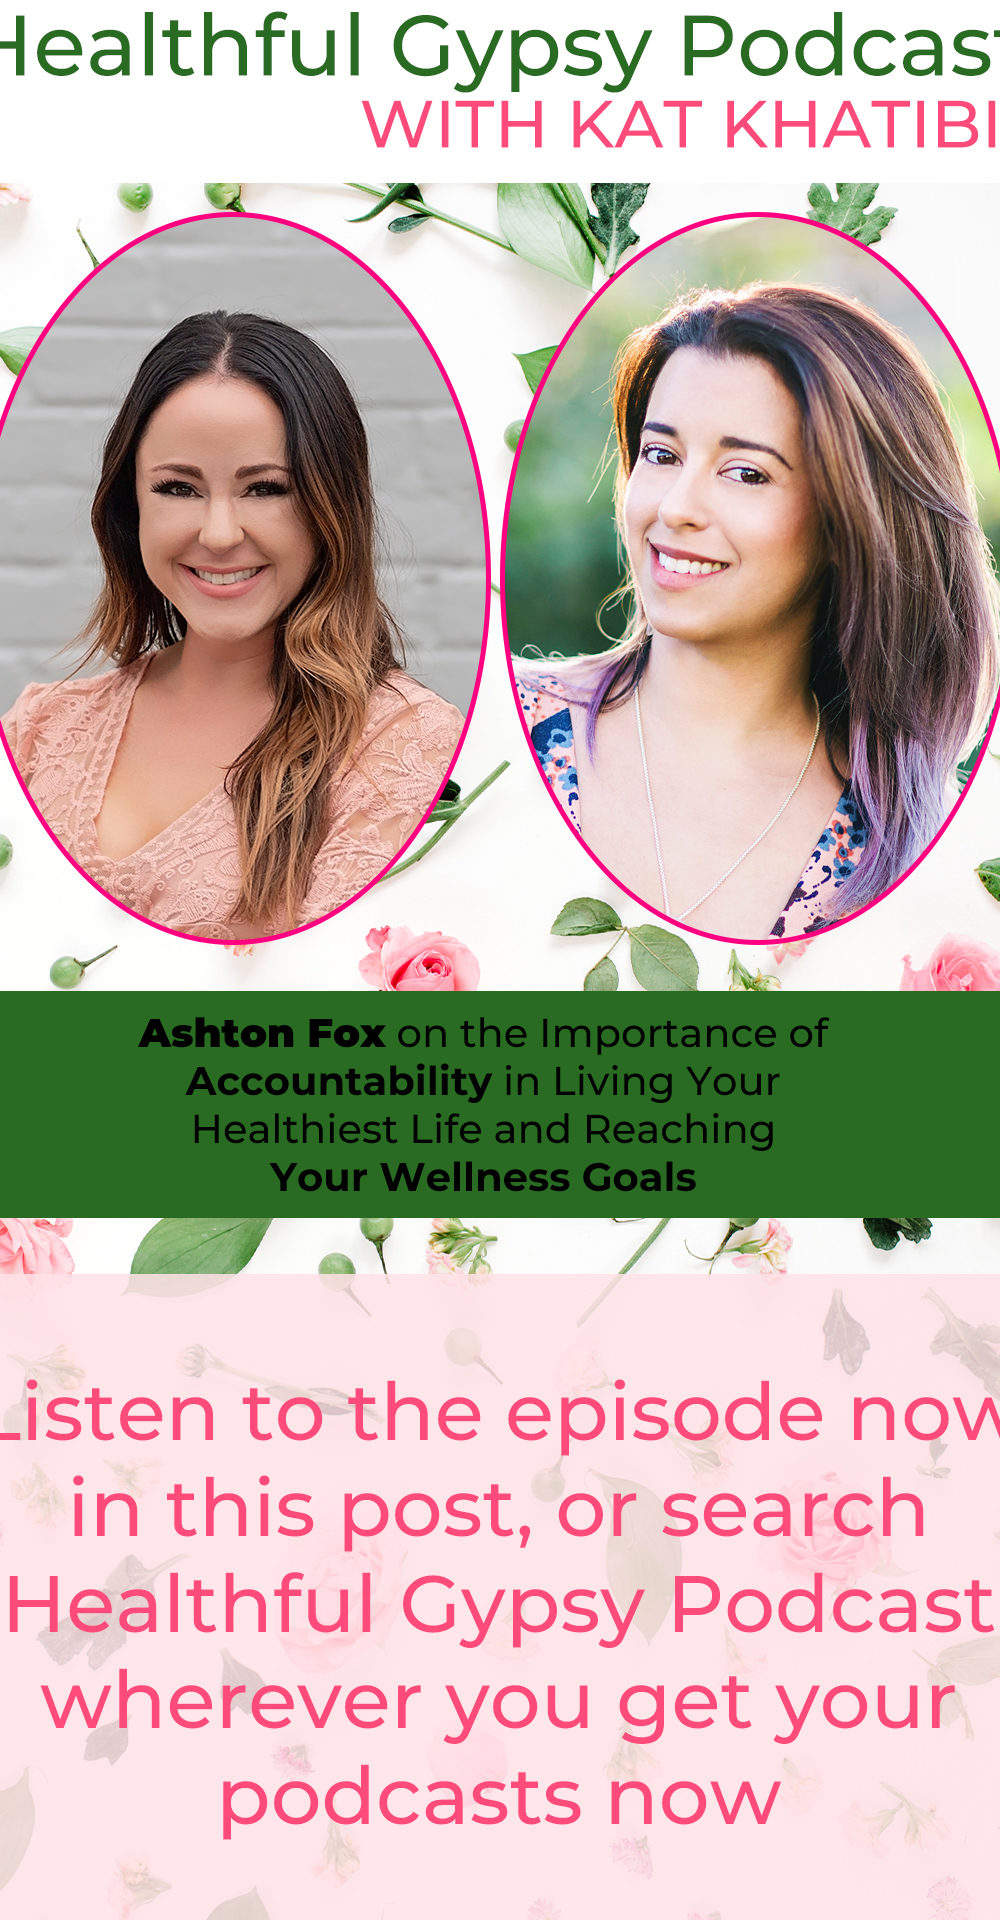 Ashton Fox on the Importance of Accountability in Living Your Healthiest Life and Reaching Your Wellness Goals